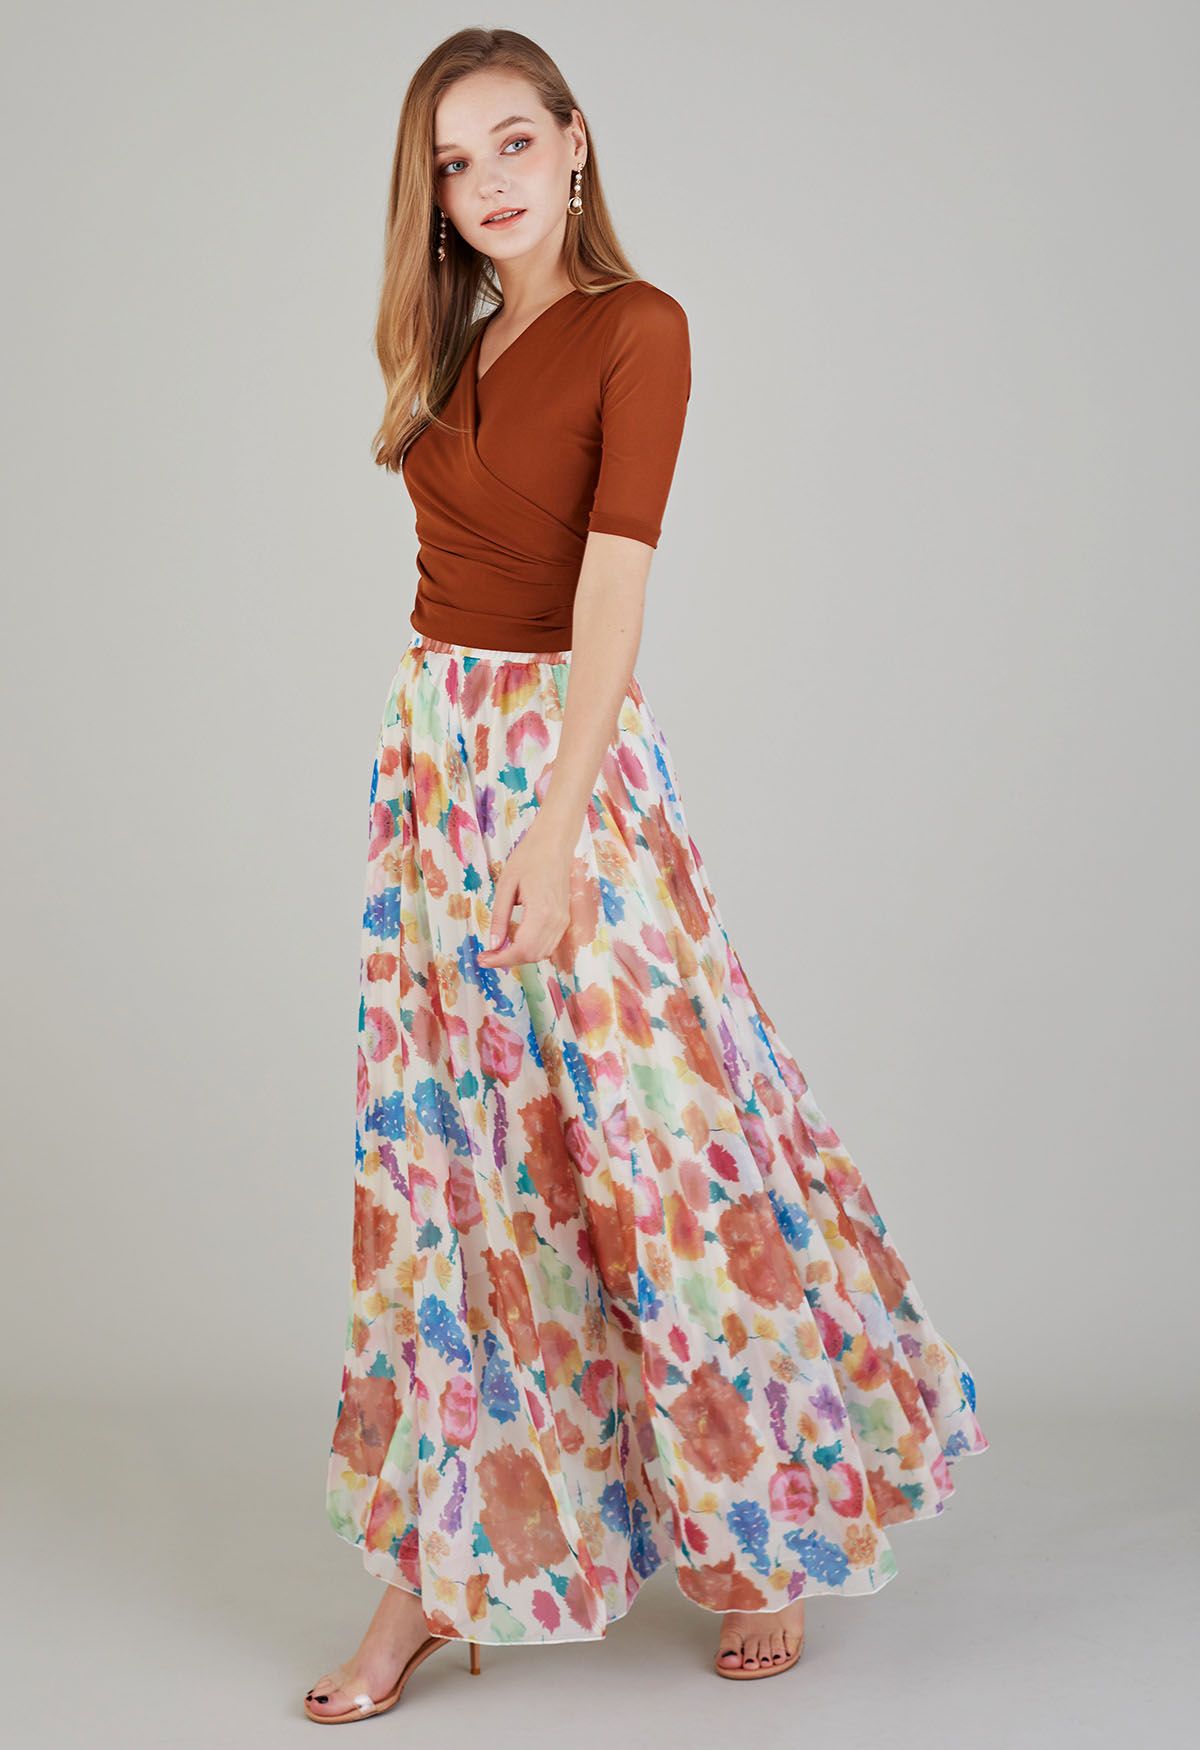 Colorful Blossom Printed Chiffon Maxi Skirt in Light Yellow